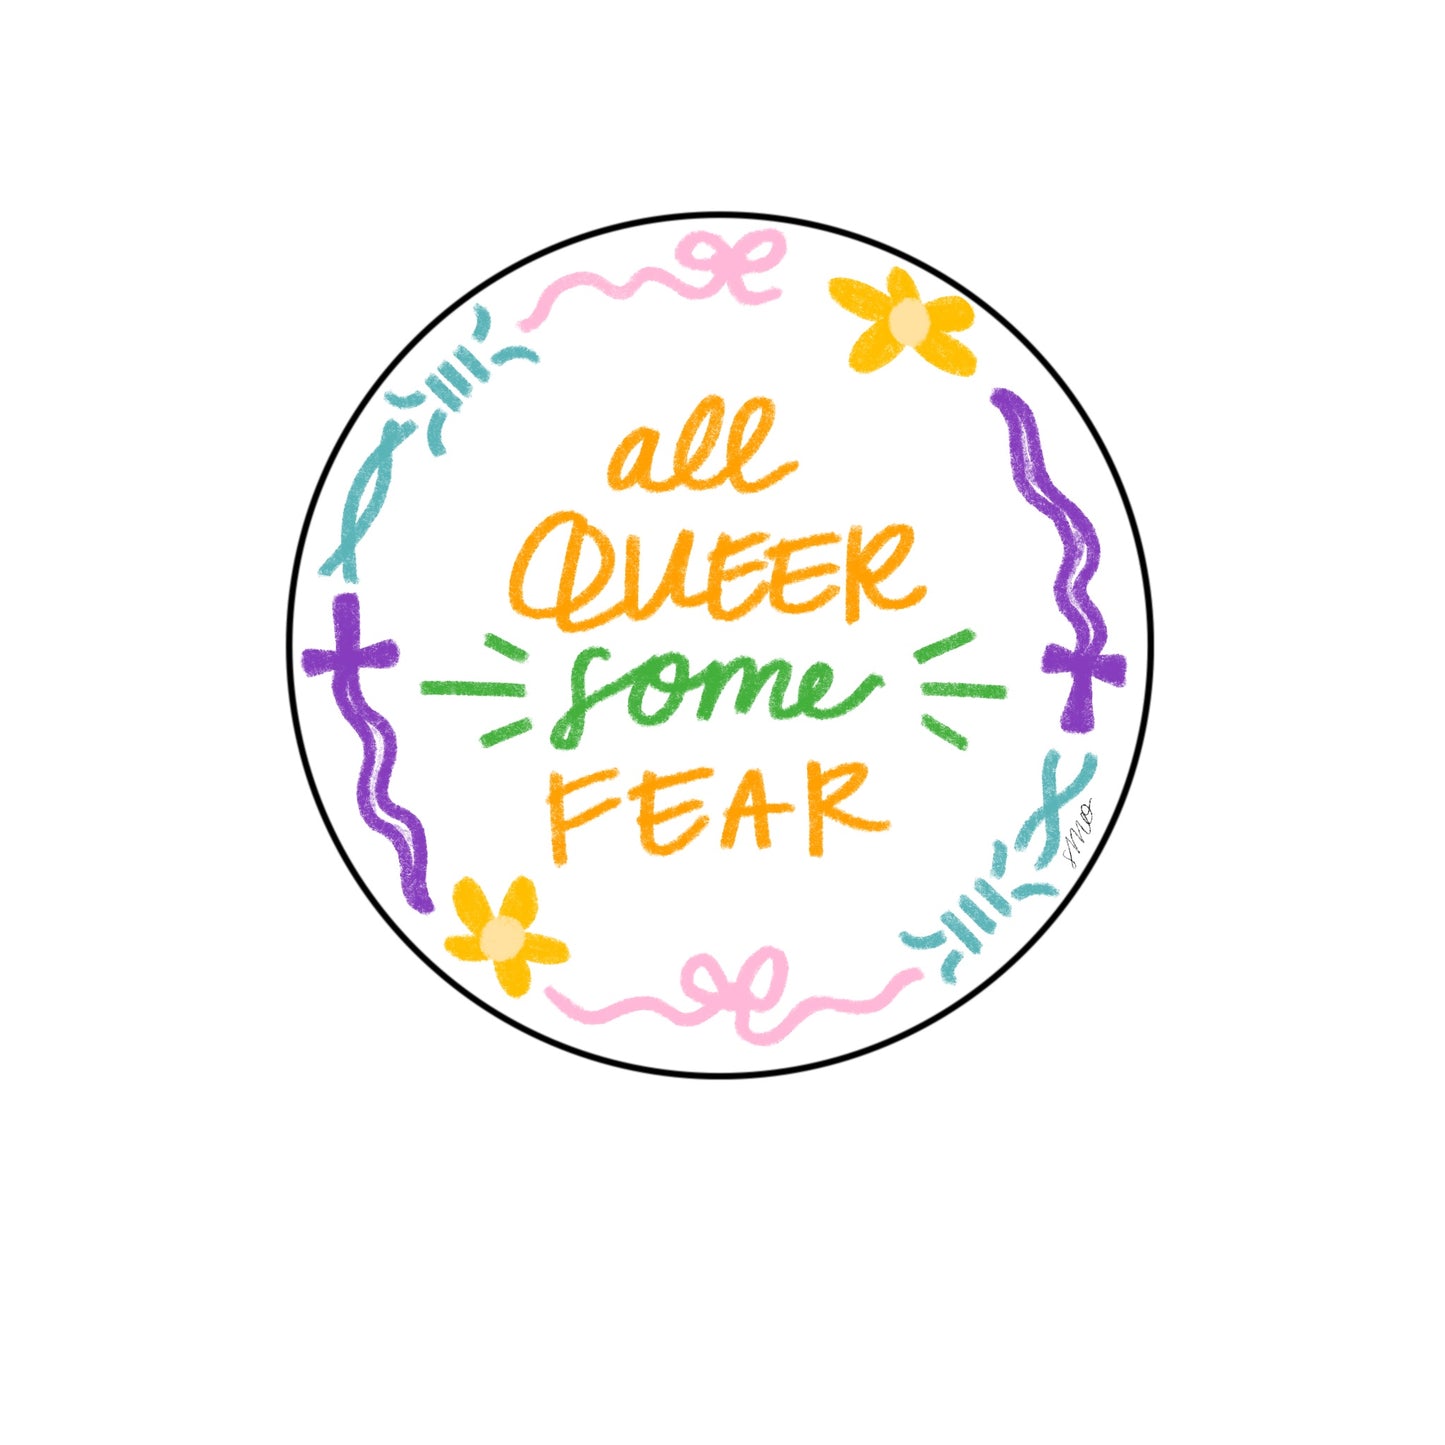 All queer no fear / all queer some fear - vinyl stickers